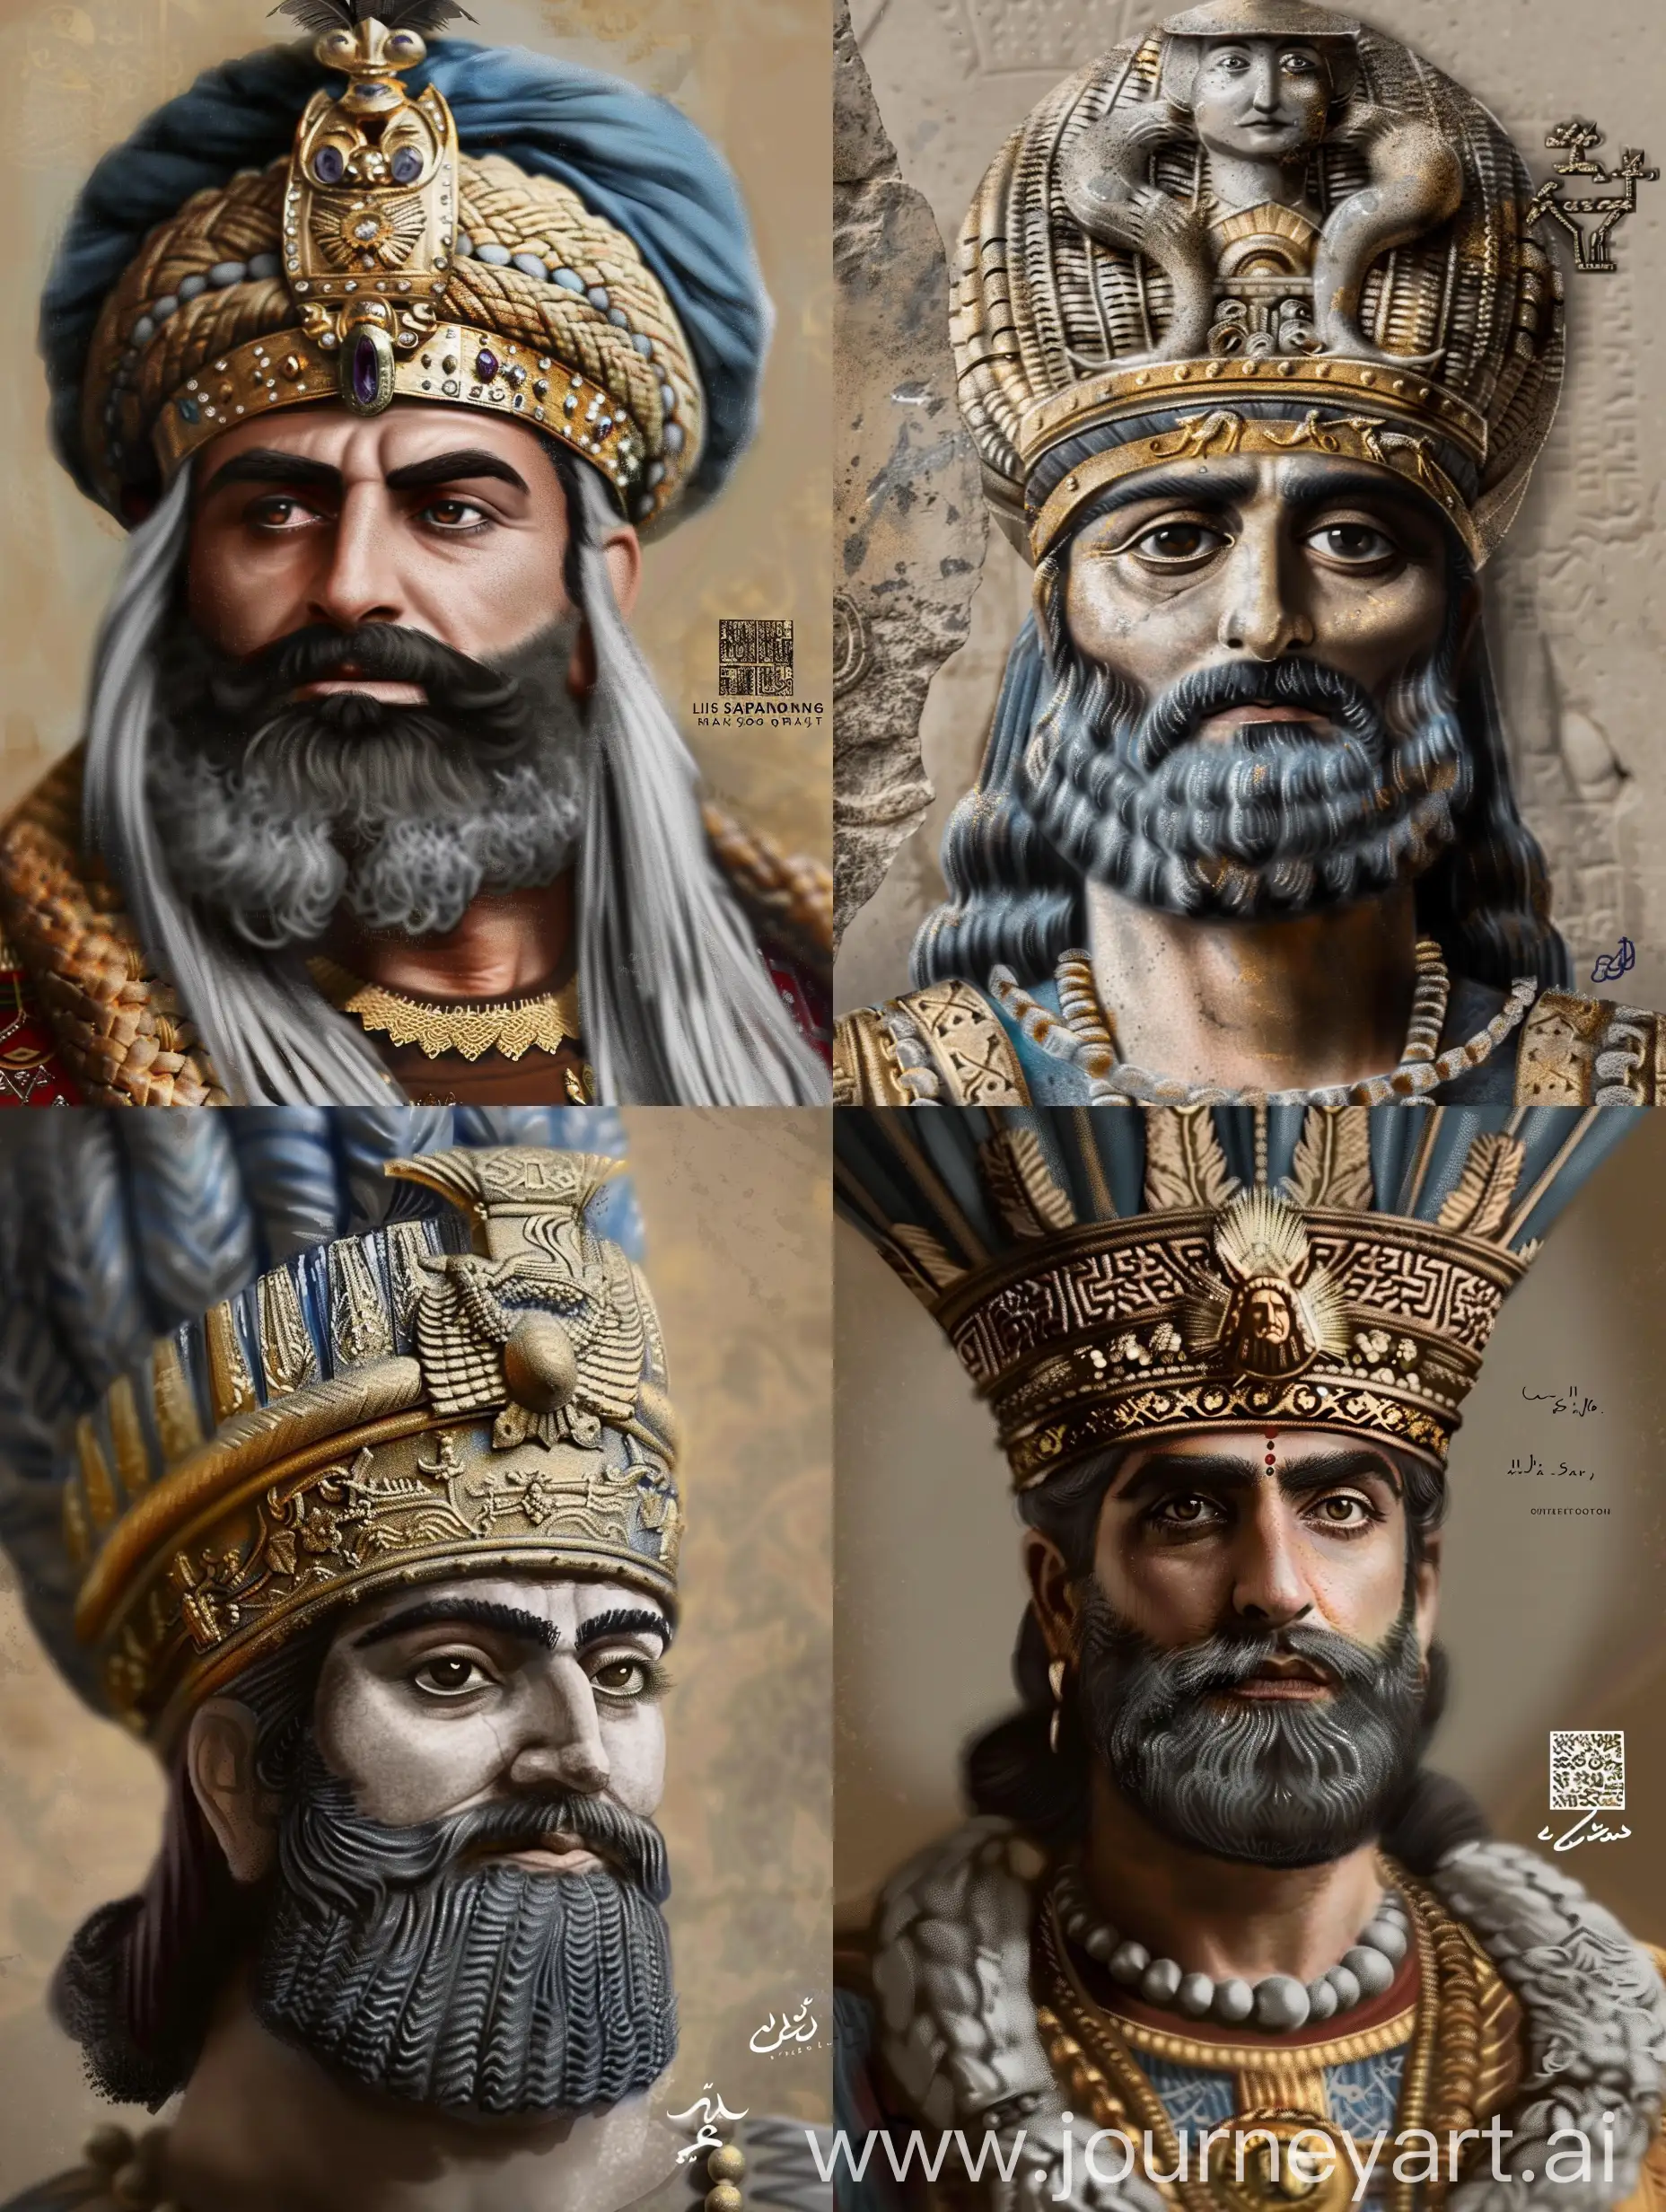 Recreate this image for me in exact detail, the photo of the Sassanid king